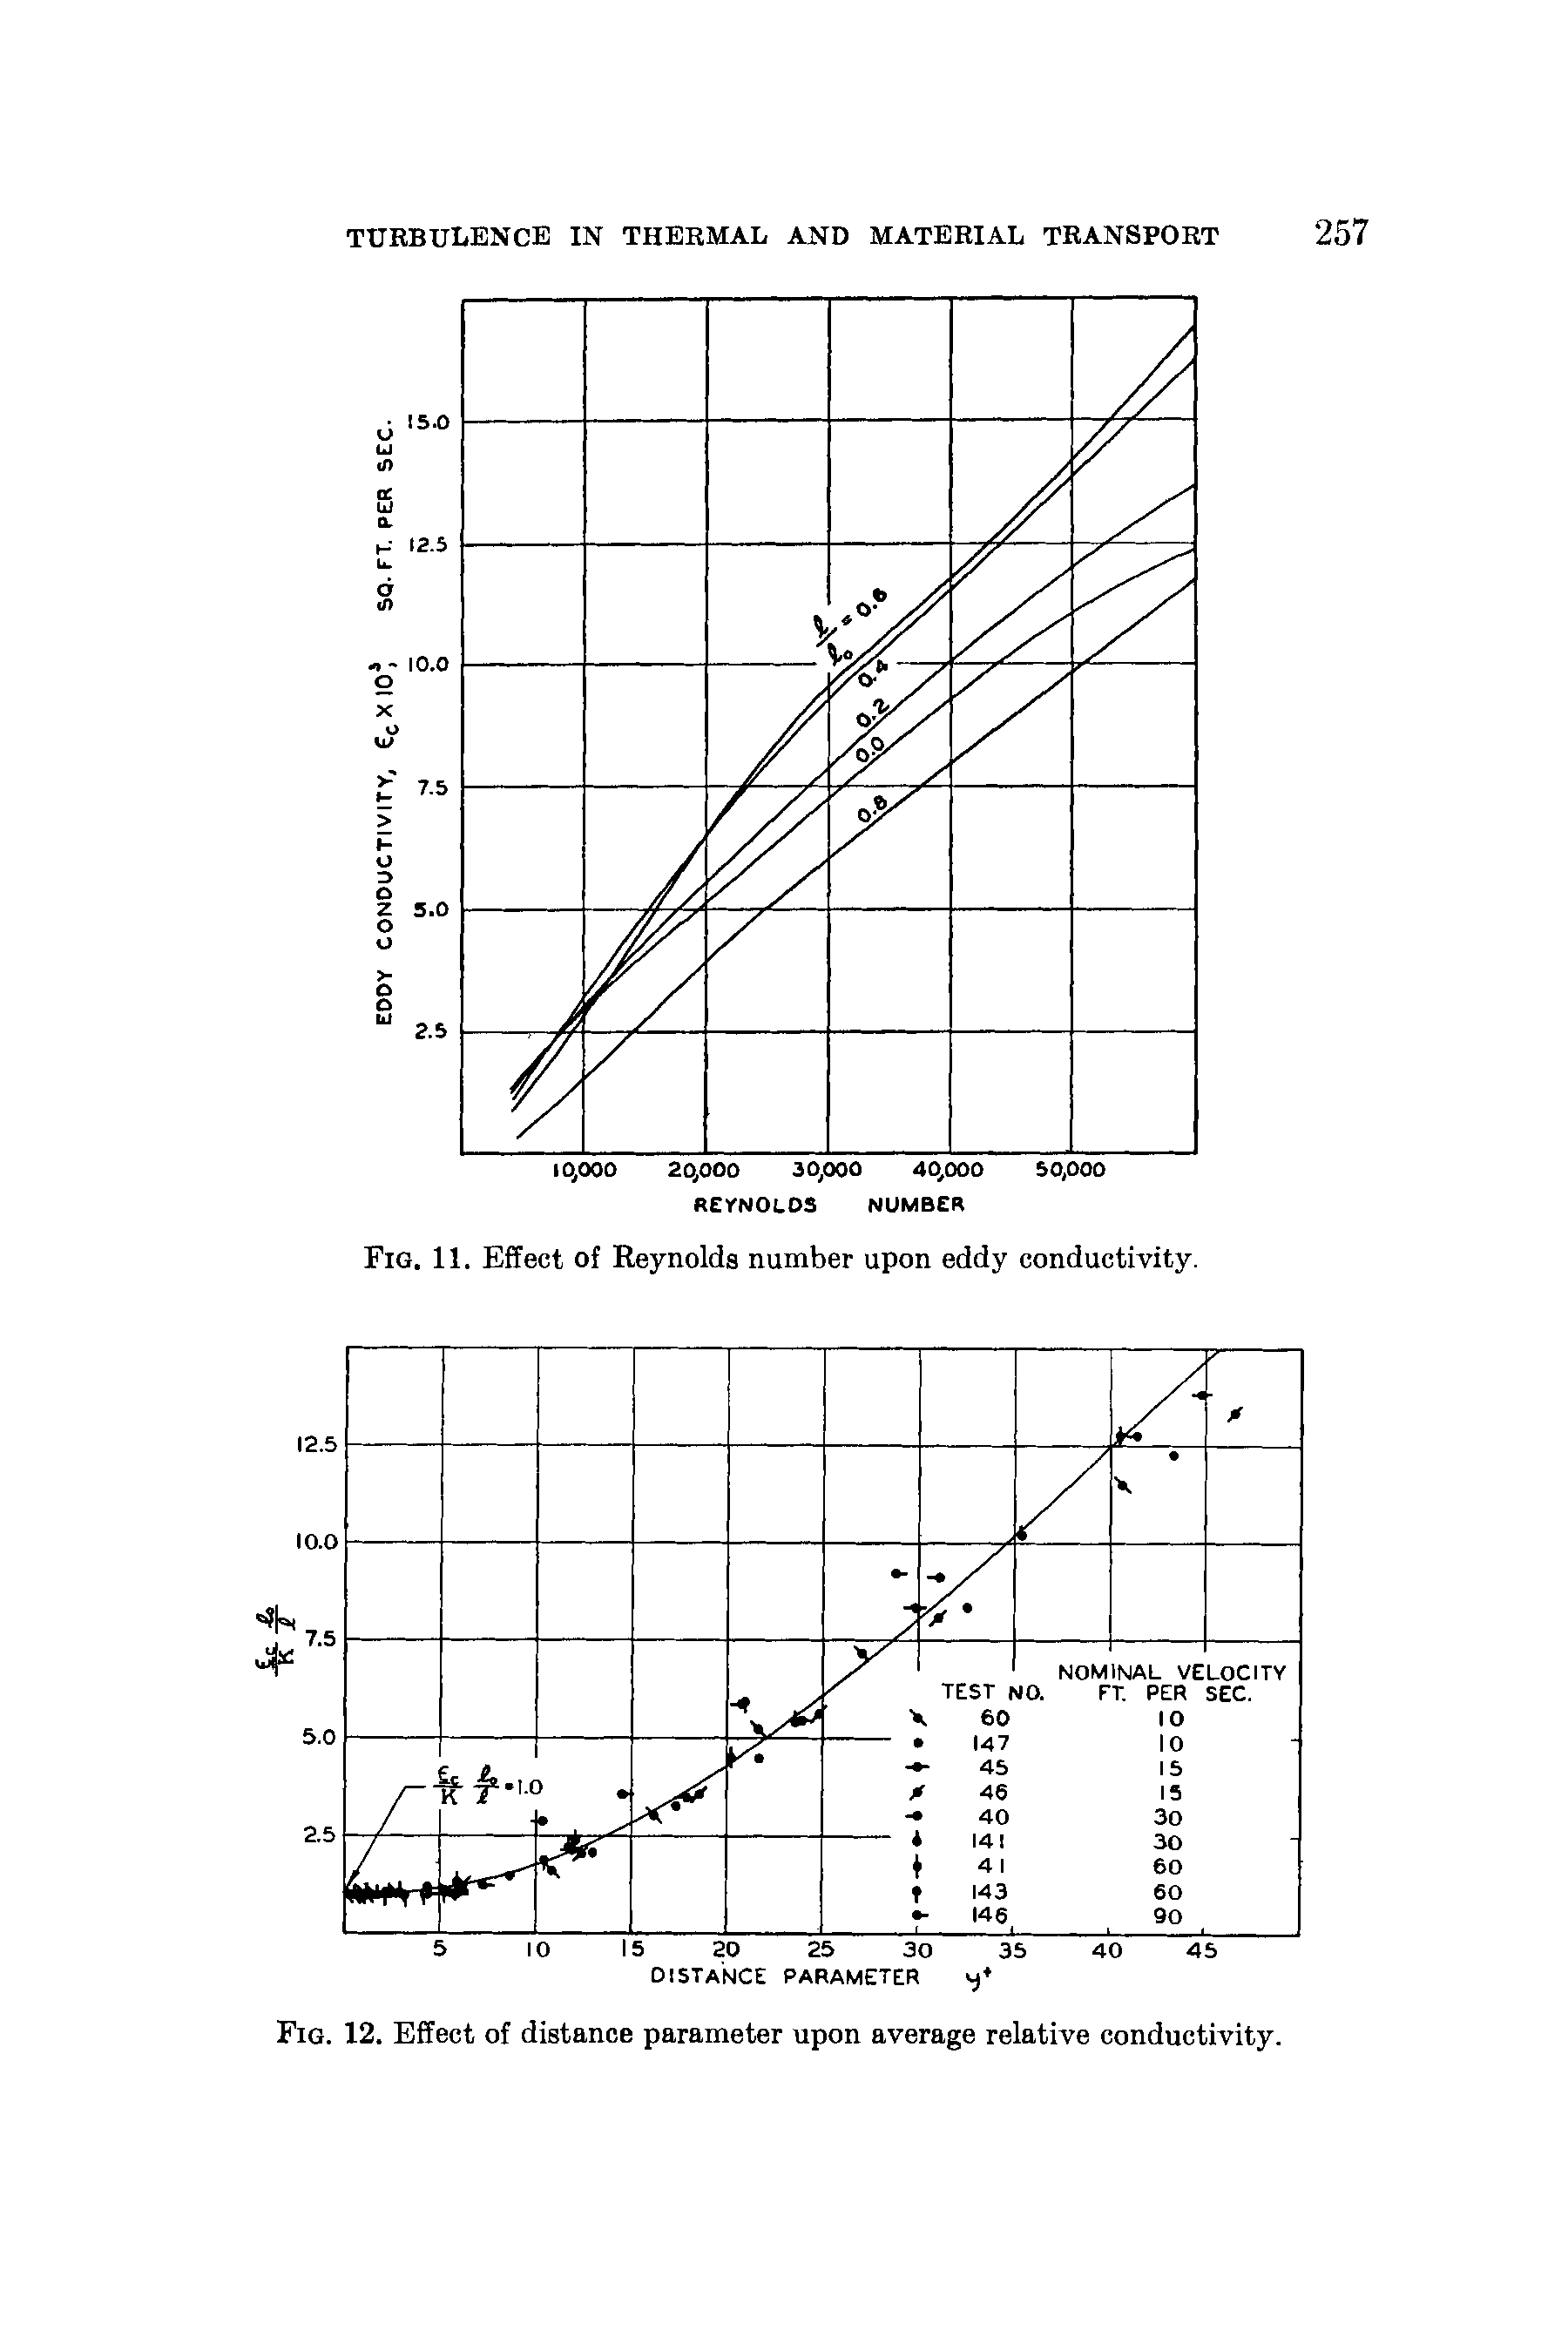 Fig. 11. Effect of Reynolds number upon eddy conductivity.